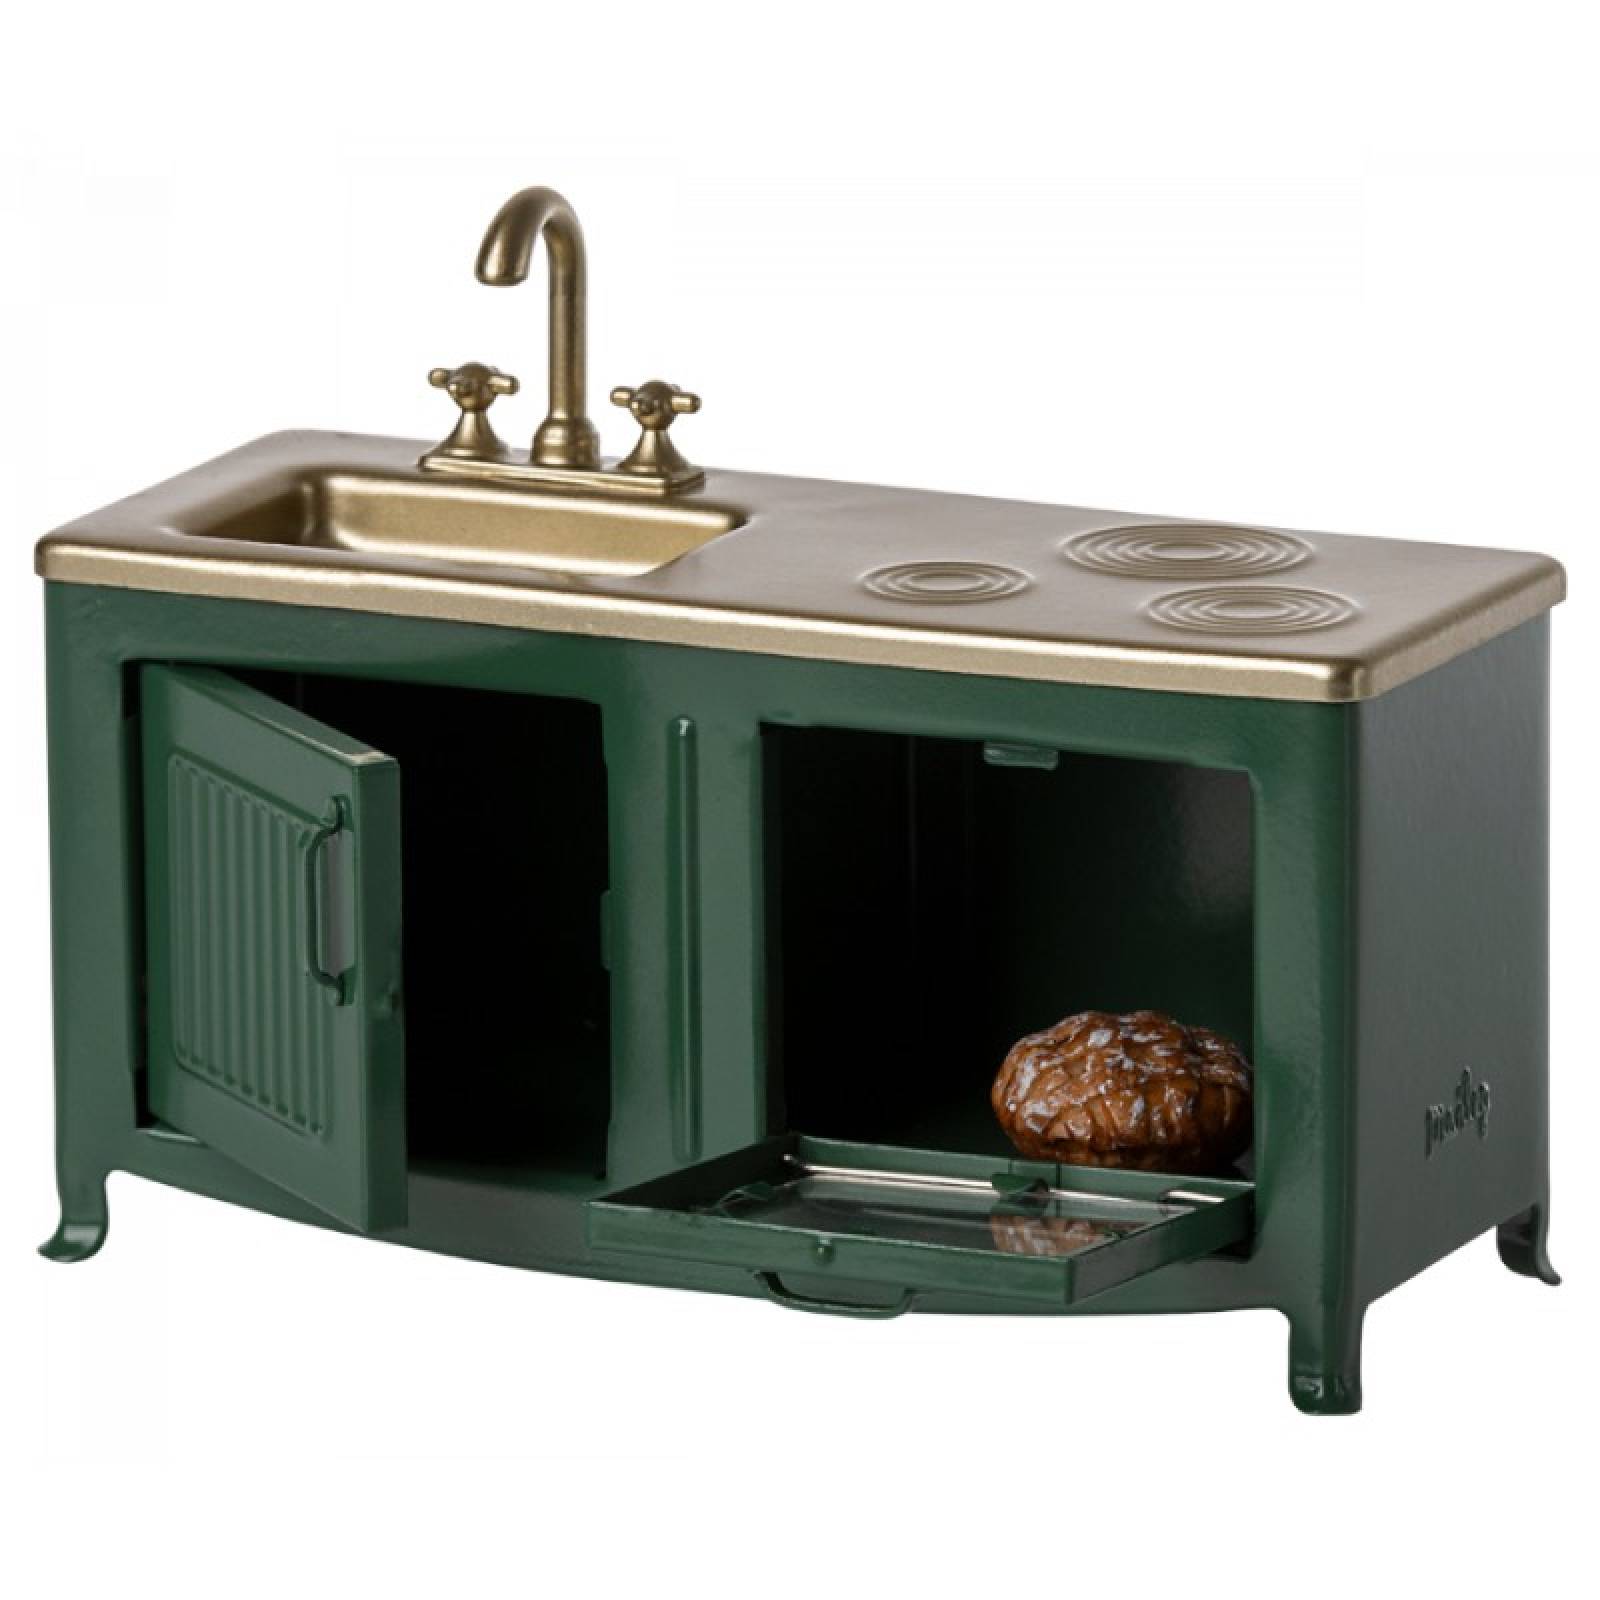 Miniature Kitchen Unit In Green By Maileg 3+ thumbnails